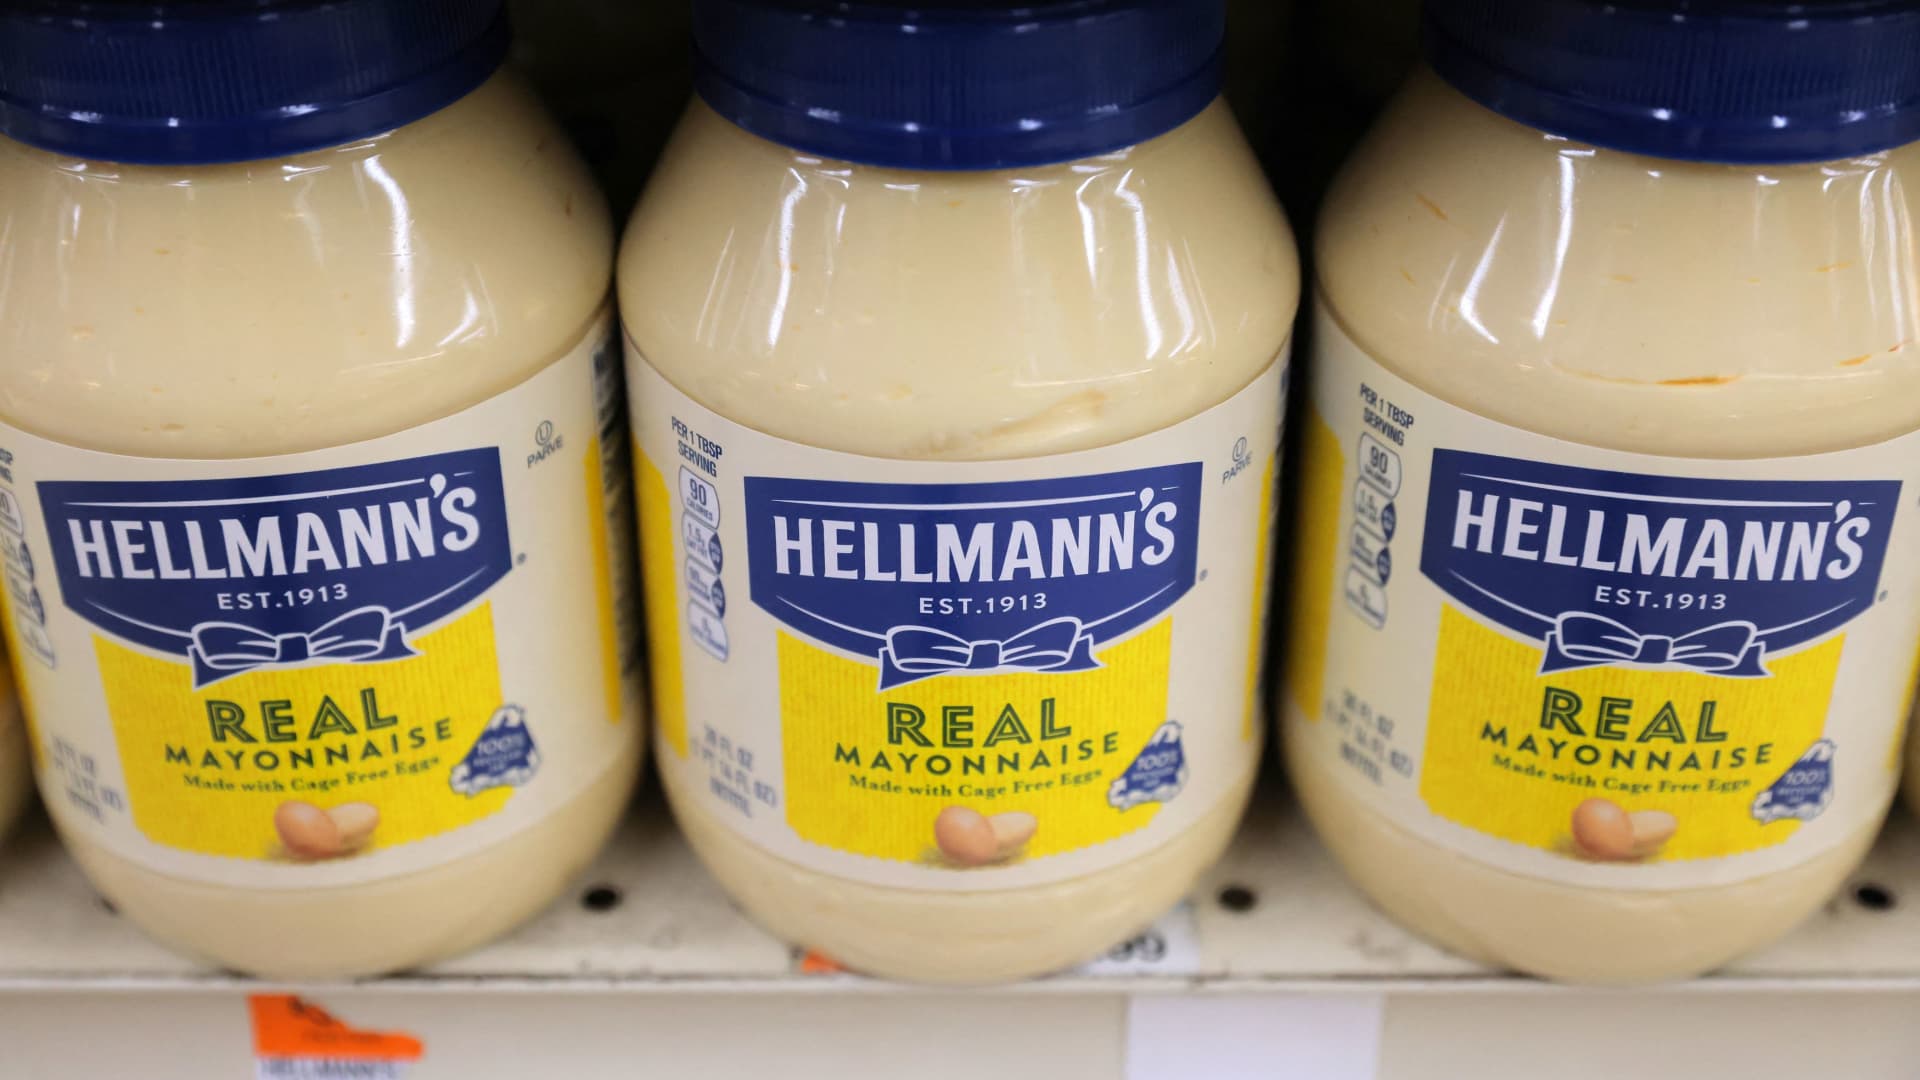 Hellmann's, a brand of Unilever, is seen on display in a store in New York, March 24, 2022.